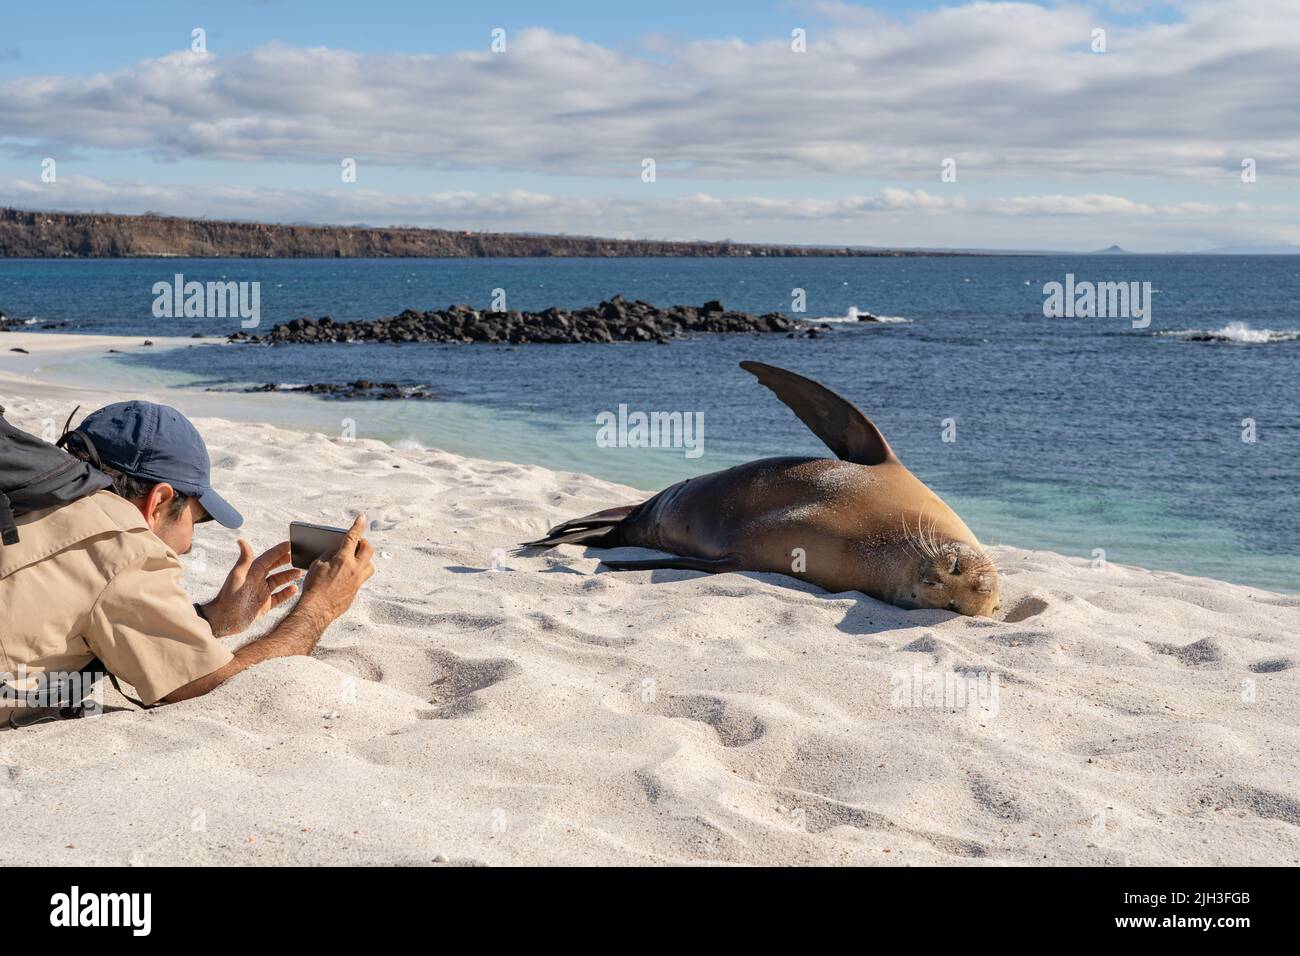 Naturalist guide takes a photo of a sea lion in the Galapagos Islands Stock Photo